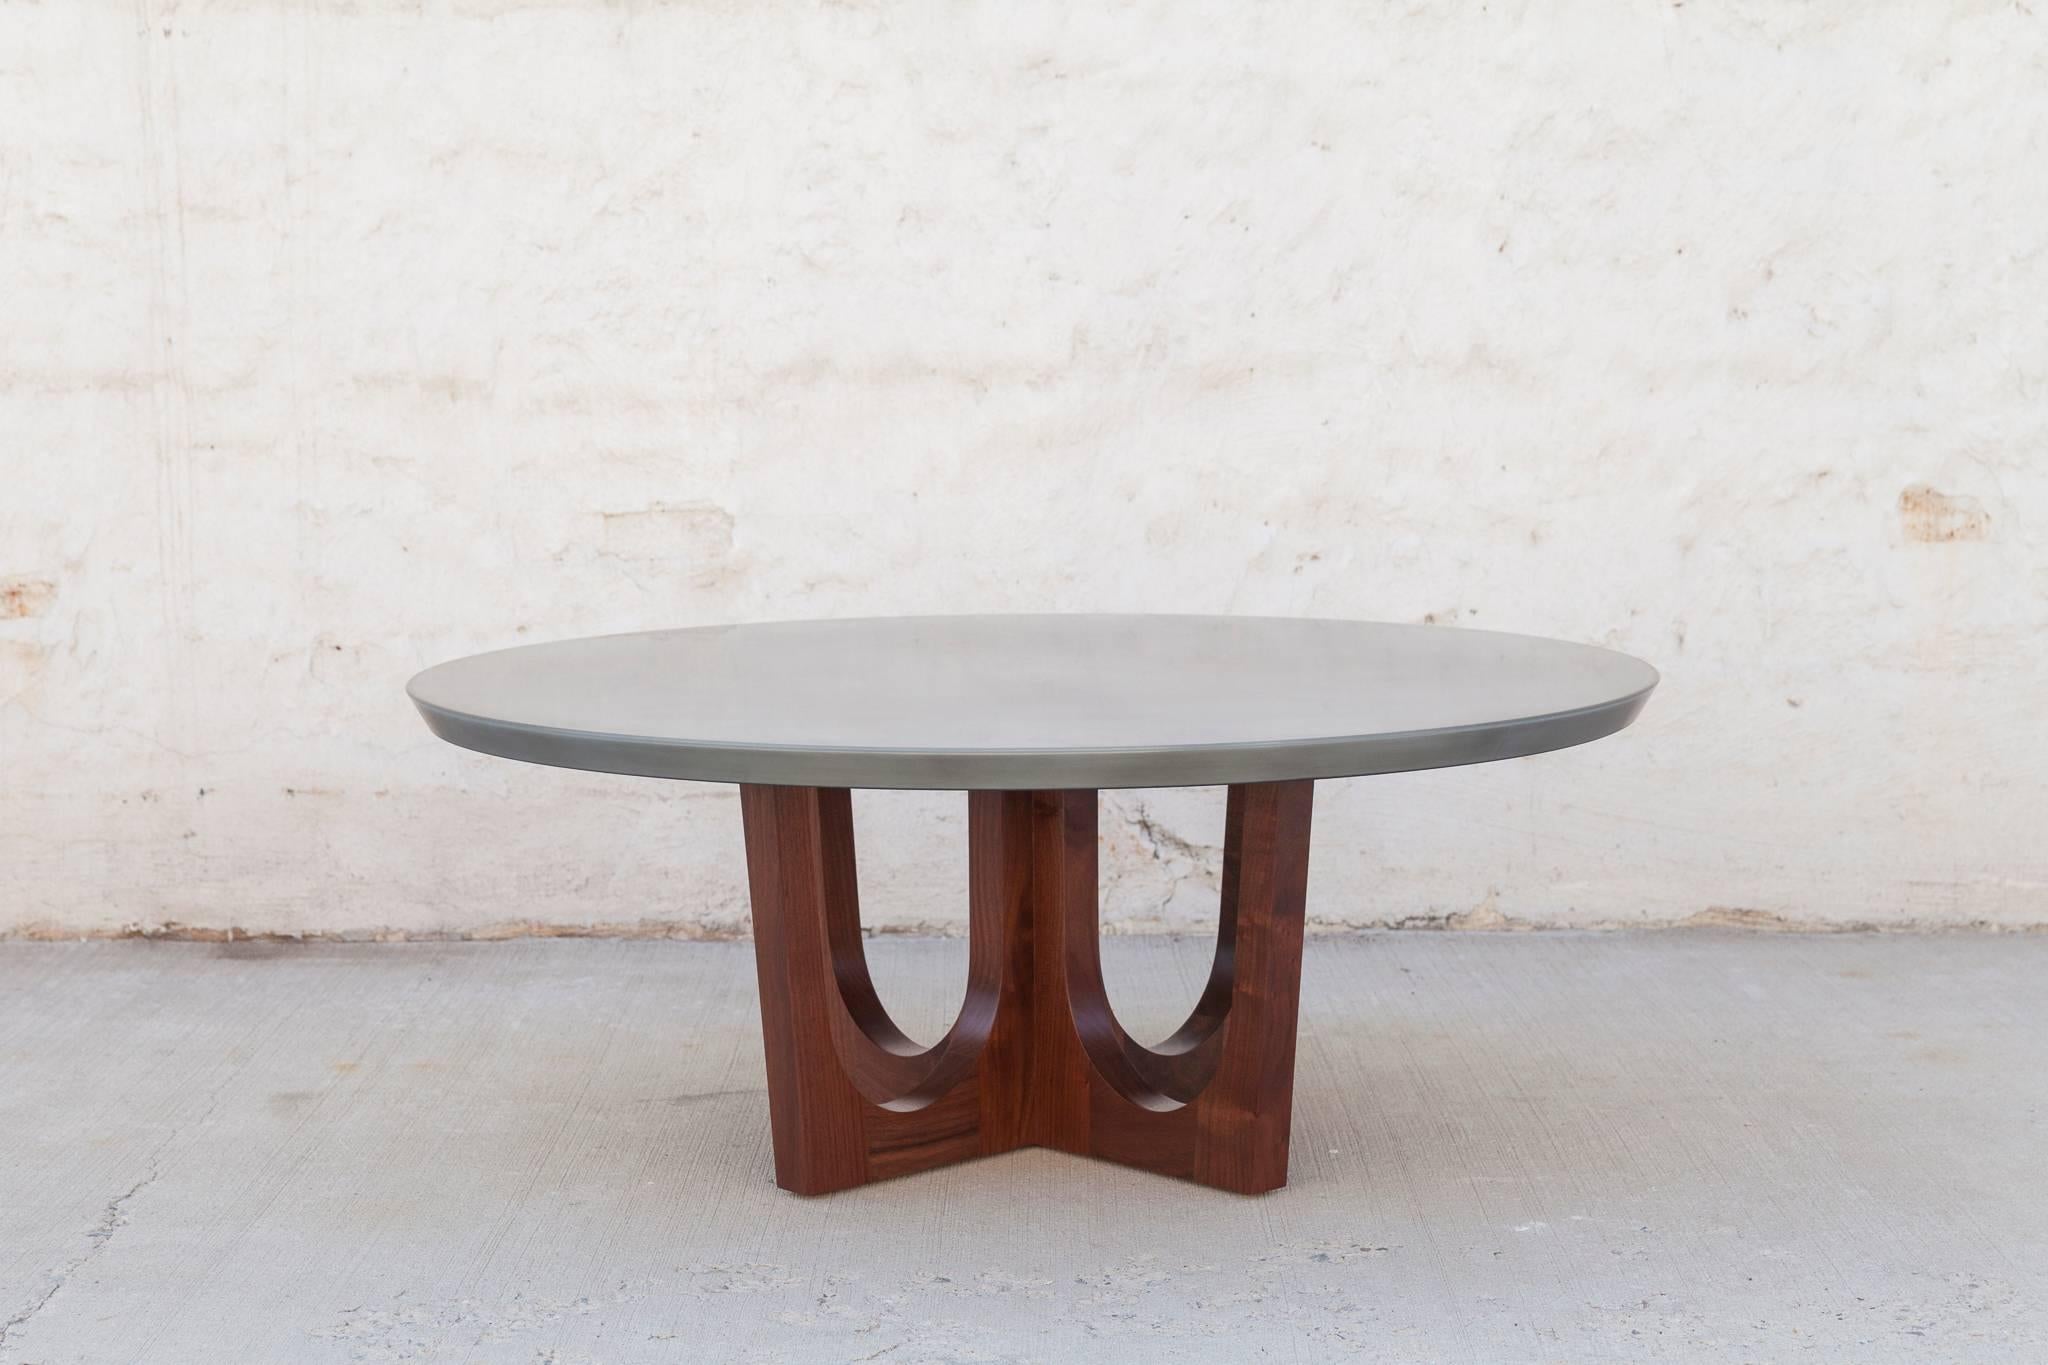 The elegant Grand Pedestal coffee table features a beveled zinc encased in resin tabletop and a curved lolita walnut base. The smooth and durable resin top is non-porous so it does not stain and there are no moisture issues.

Standard size options-